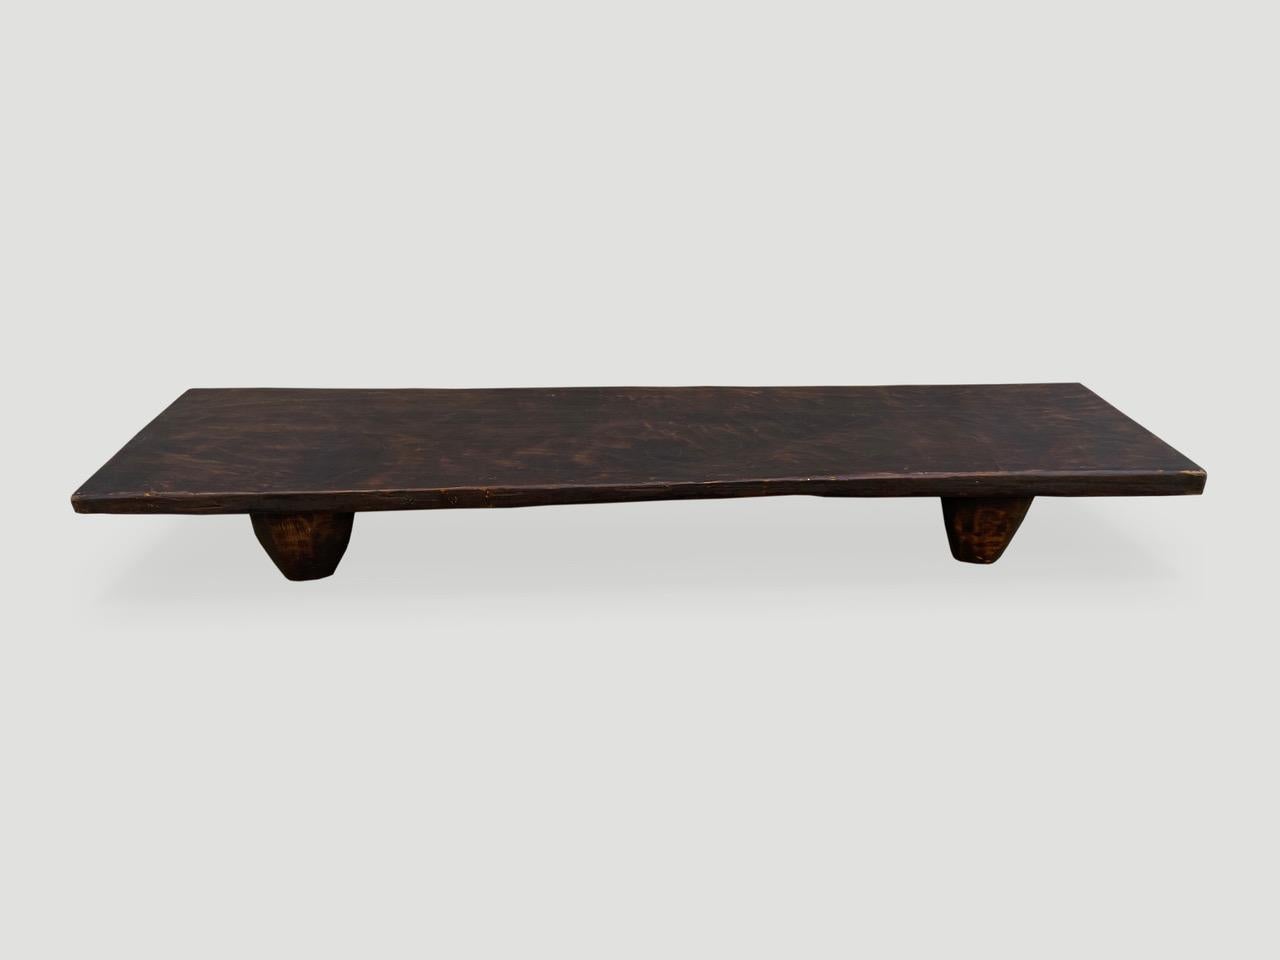 Tribal Andrianna Shamaris Antique African Minimalist Coffee Table or Bench